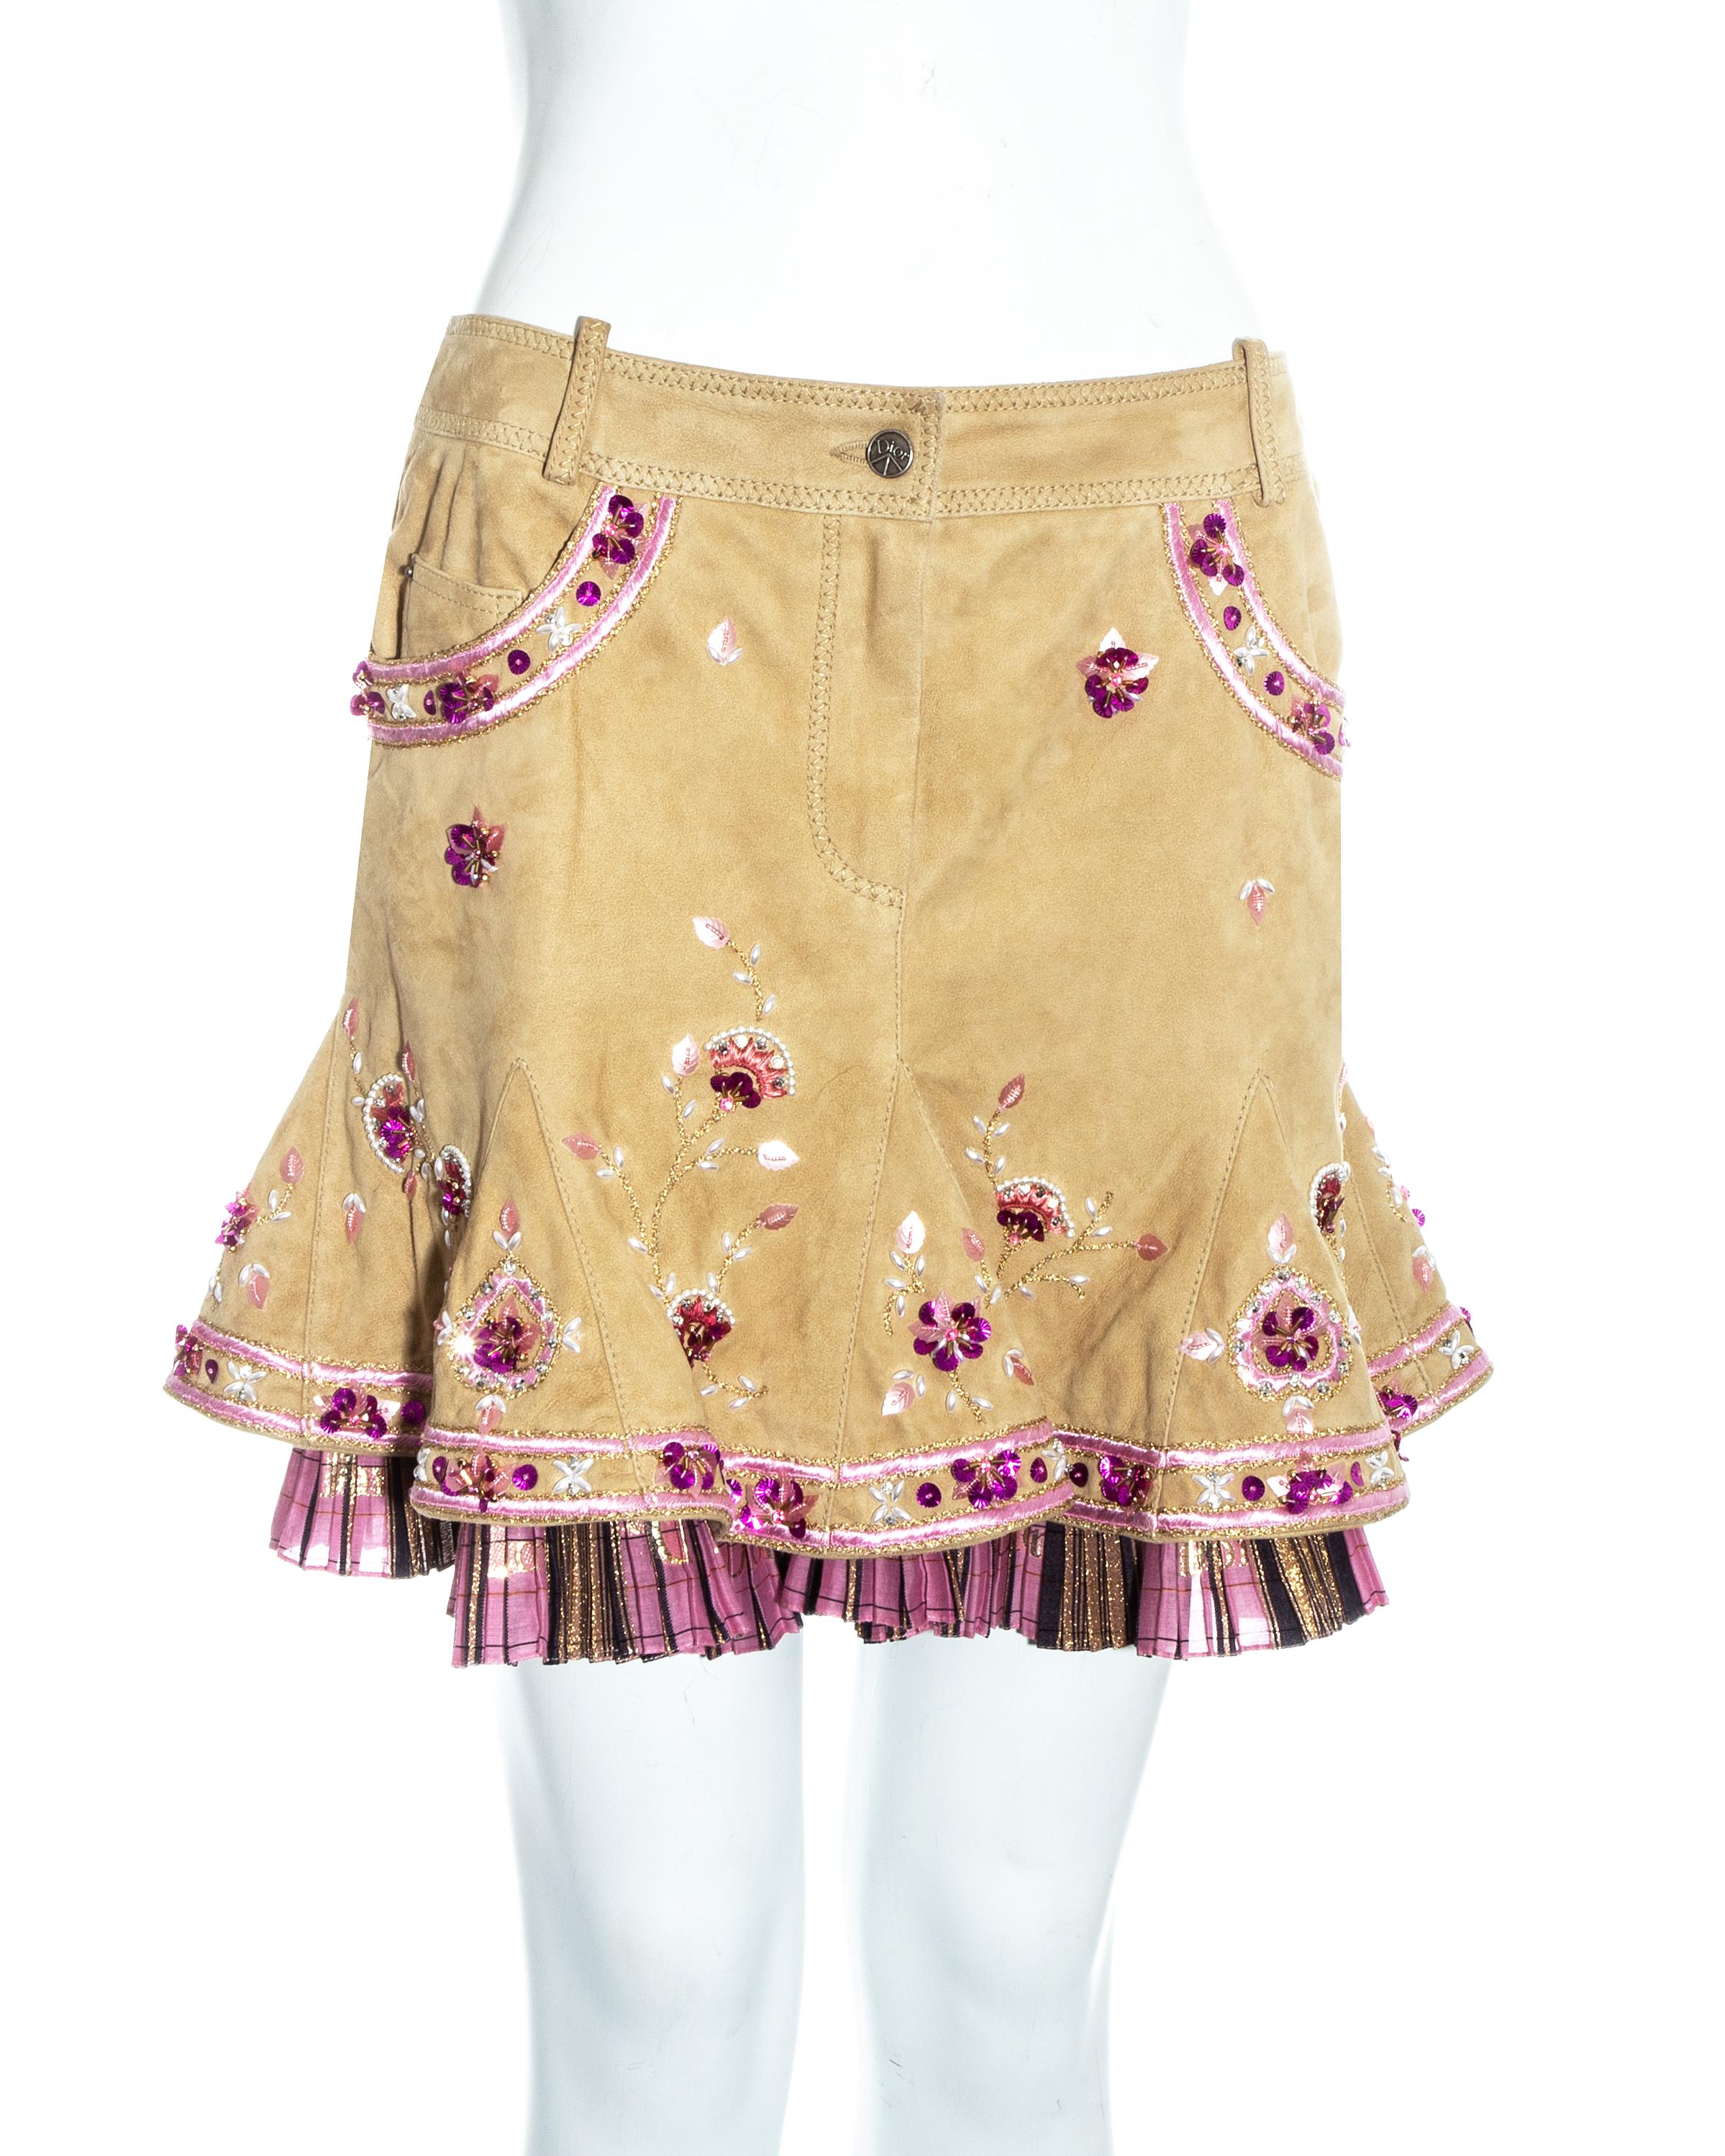 Christian Dior by John Galliano. Cream suede mini skirt with pink floral embroidery and pleated taffeta underskirt.

Spring-Summer 2005